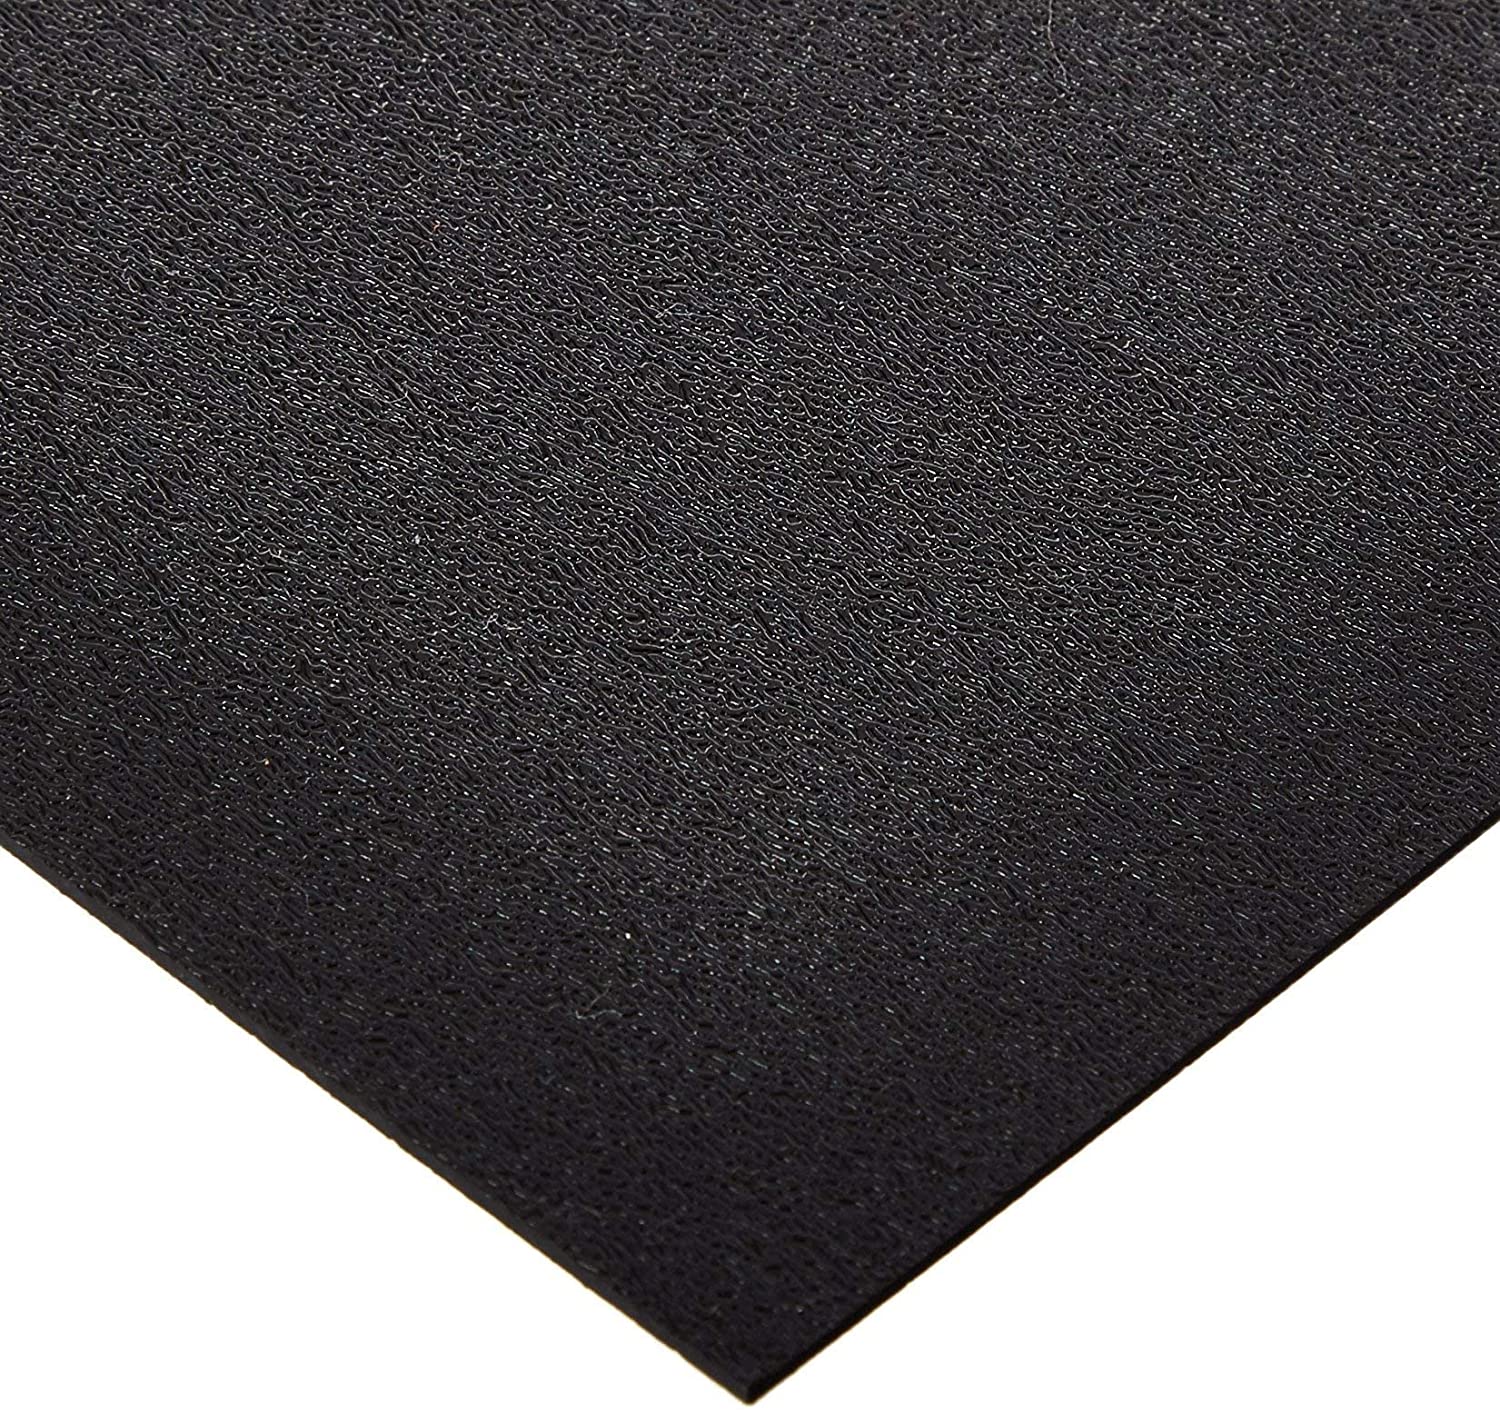 ABS General Purpose, Sheet, Black, Haircell 1 Side, General